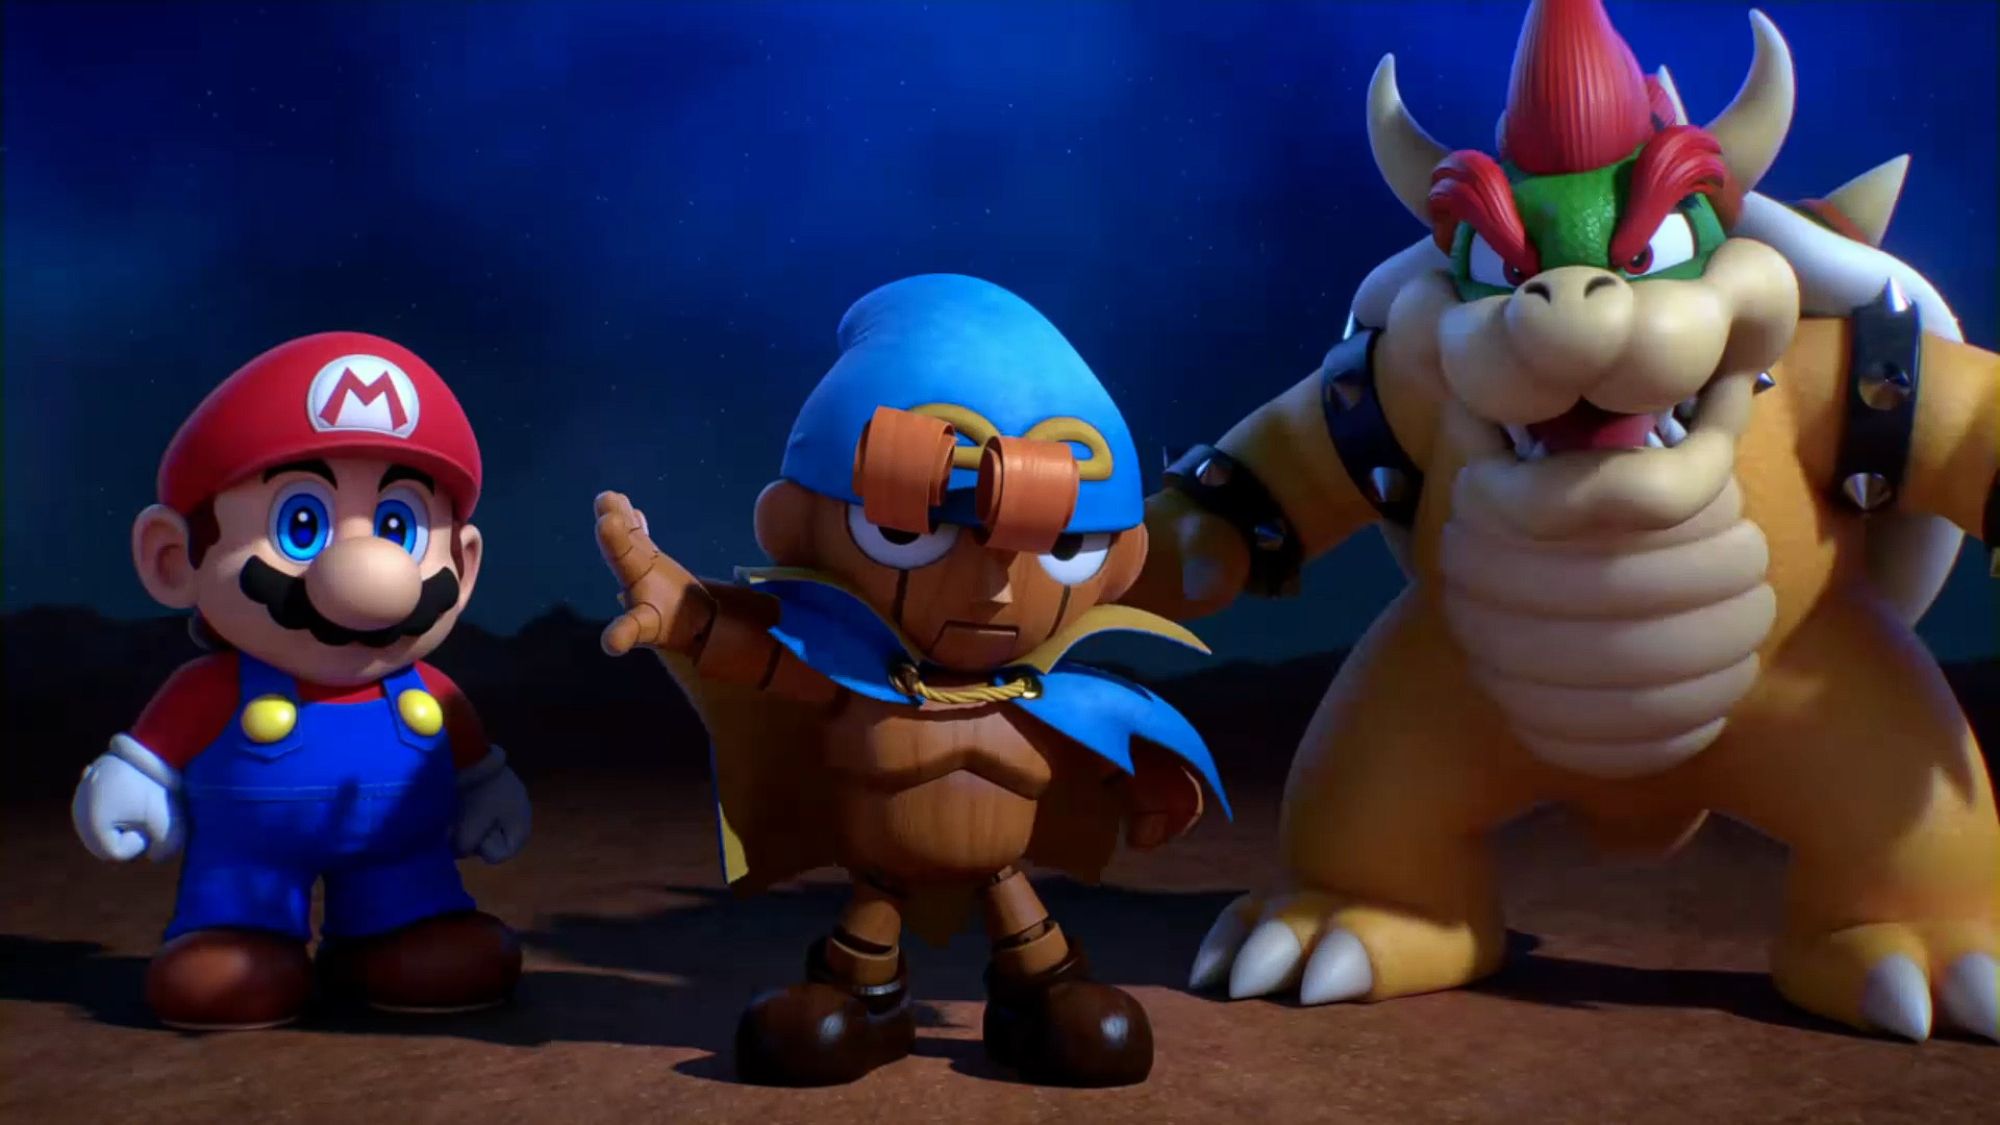 Super Mario RPG Mario, Geno, And Bowser About To Perform A Triple Move